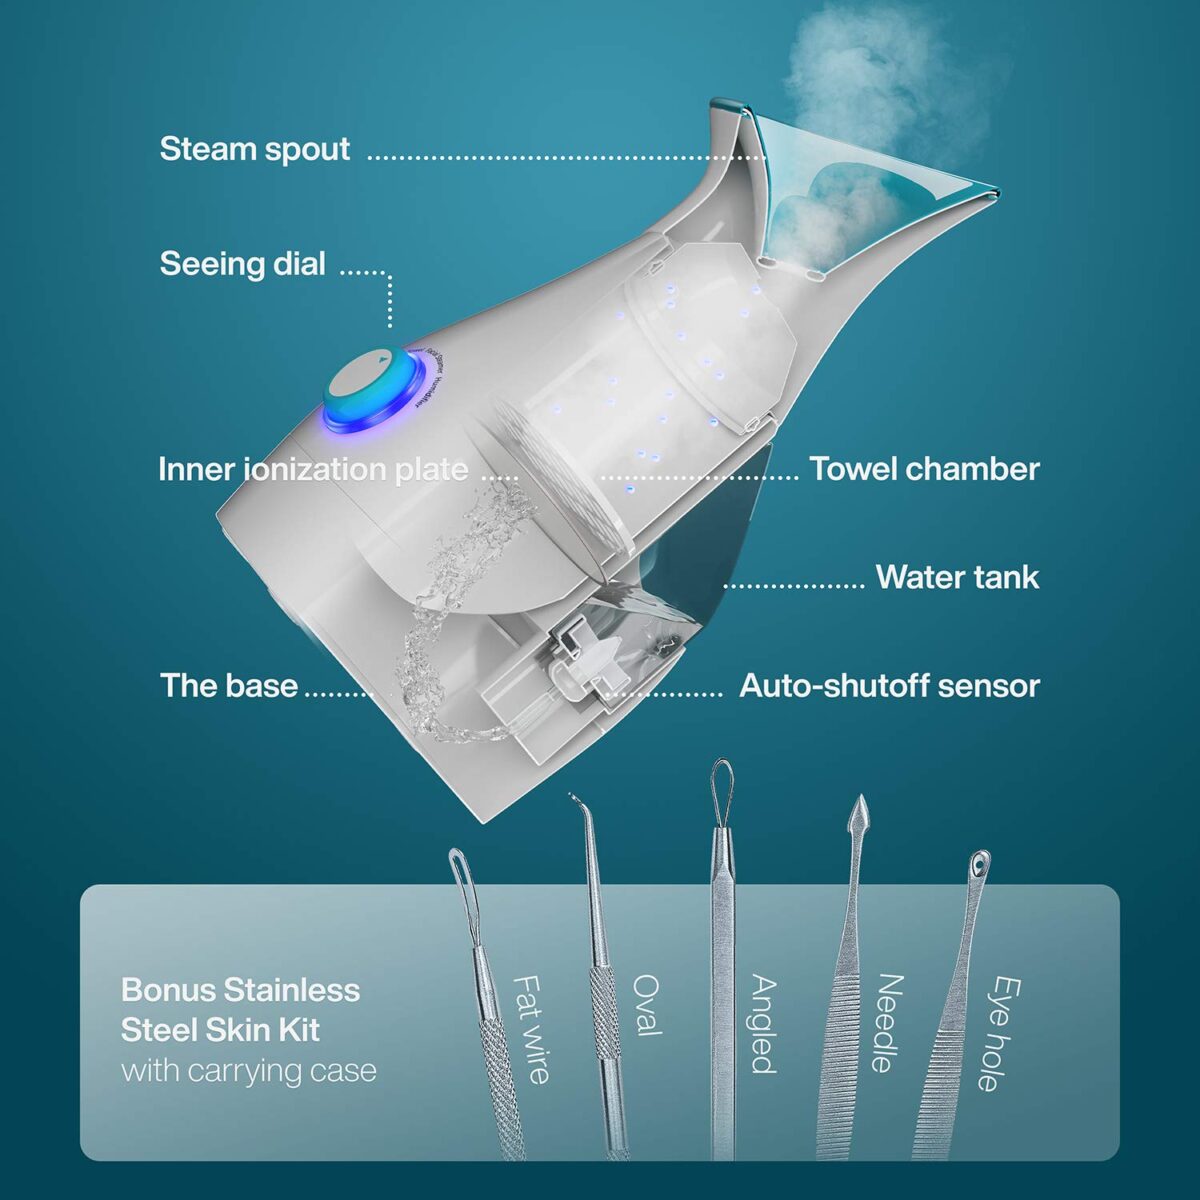 NanoSteamer Large 3-in-1 Nano Ionic Facial Steamer with Precise Temp Control 30 Min Steam Time, Humidifier, Unclogs Pores, Blackheads, Spa Quality